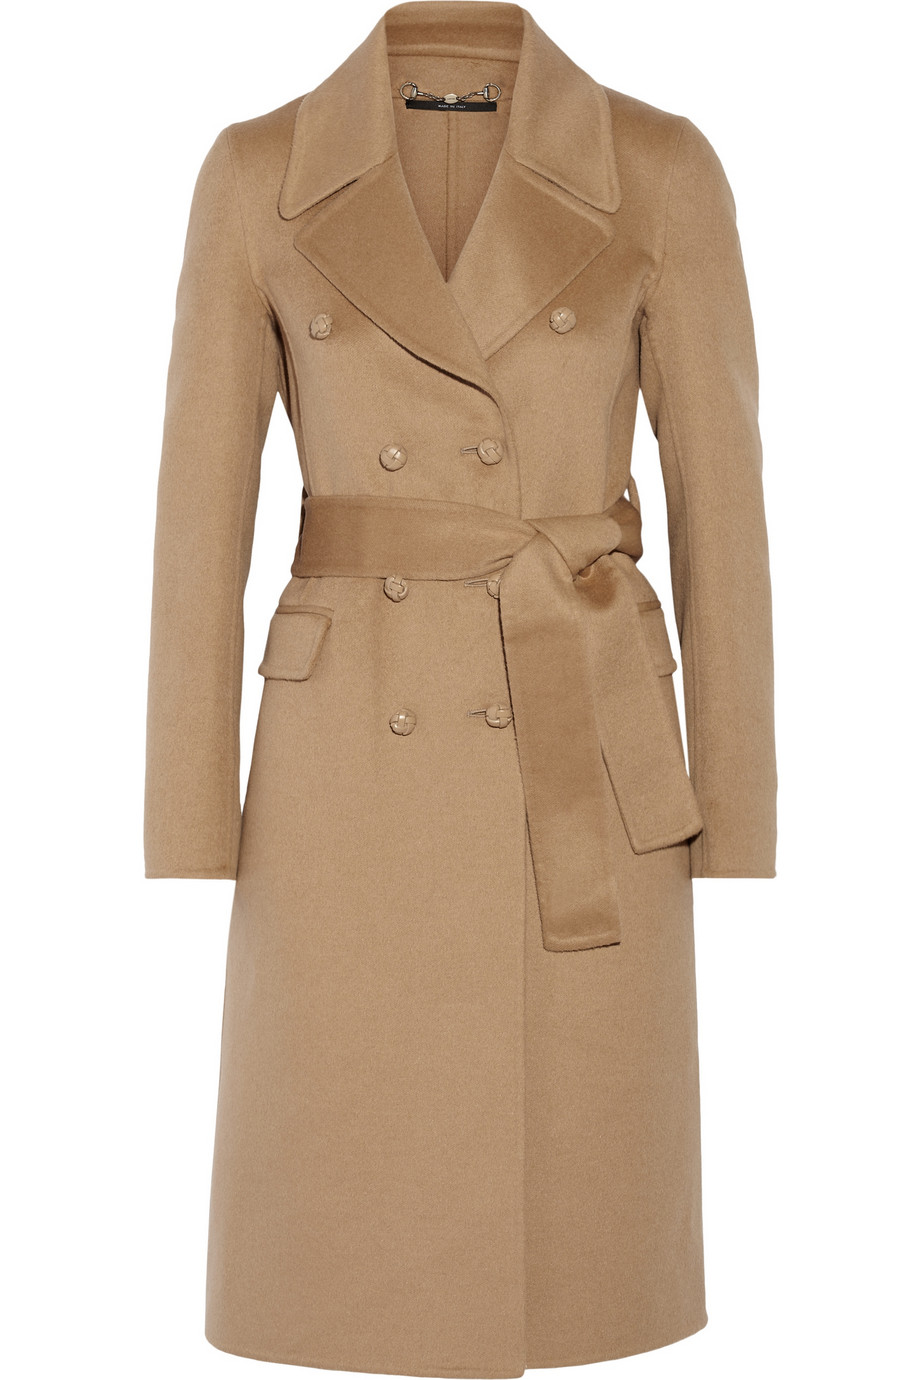 Women's 2015 Fall Coat Trends: Military Trench | MiKADO